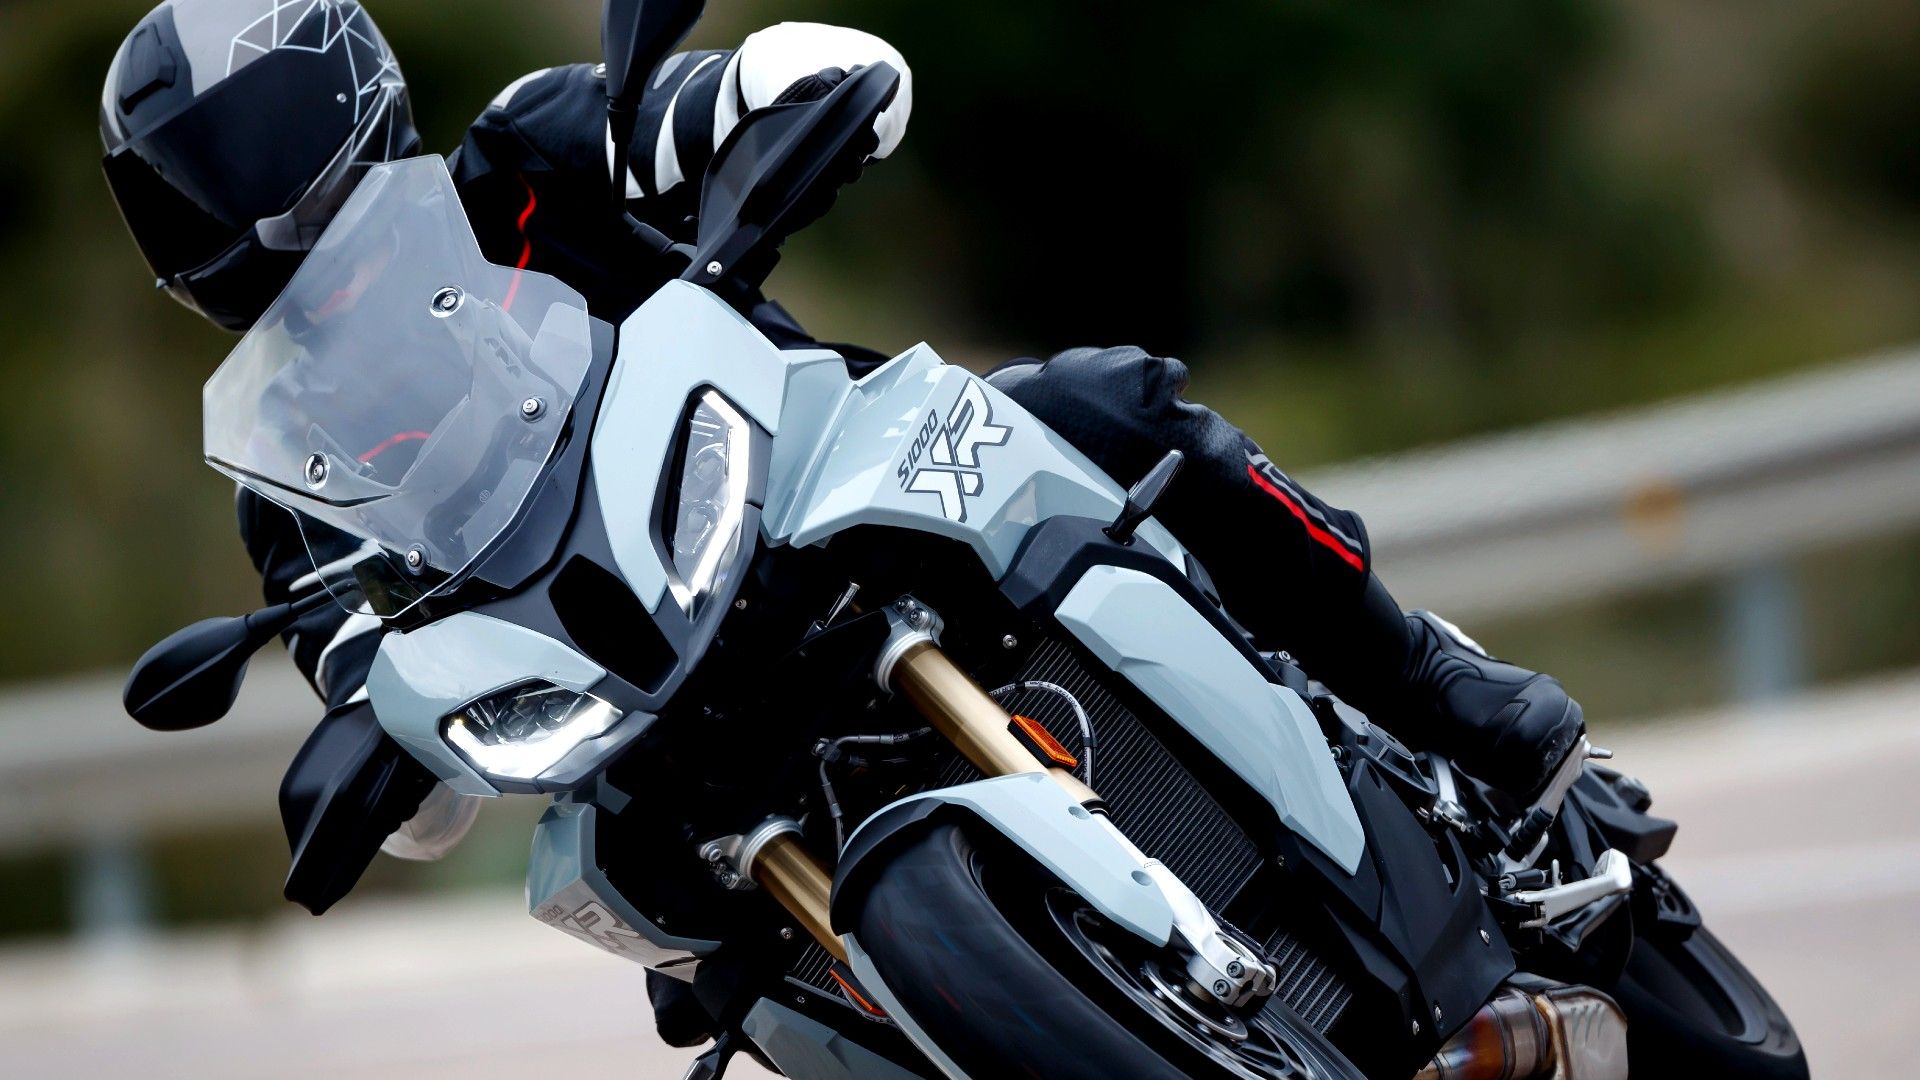 Planning To Buy A BMW Motorcycle? Here’s A Party-Pooper You Didn’t Expect